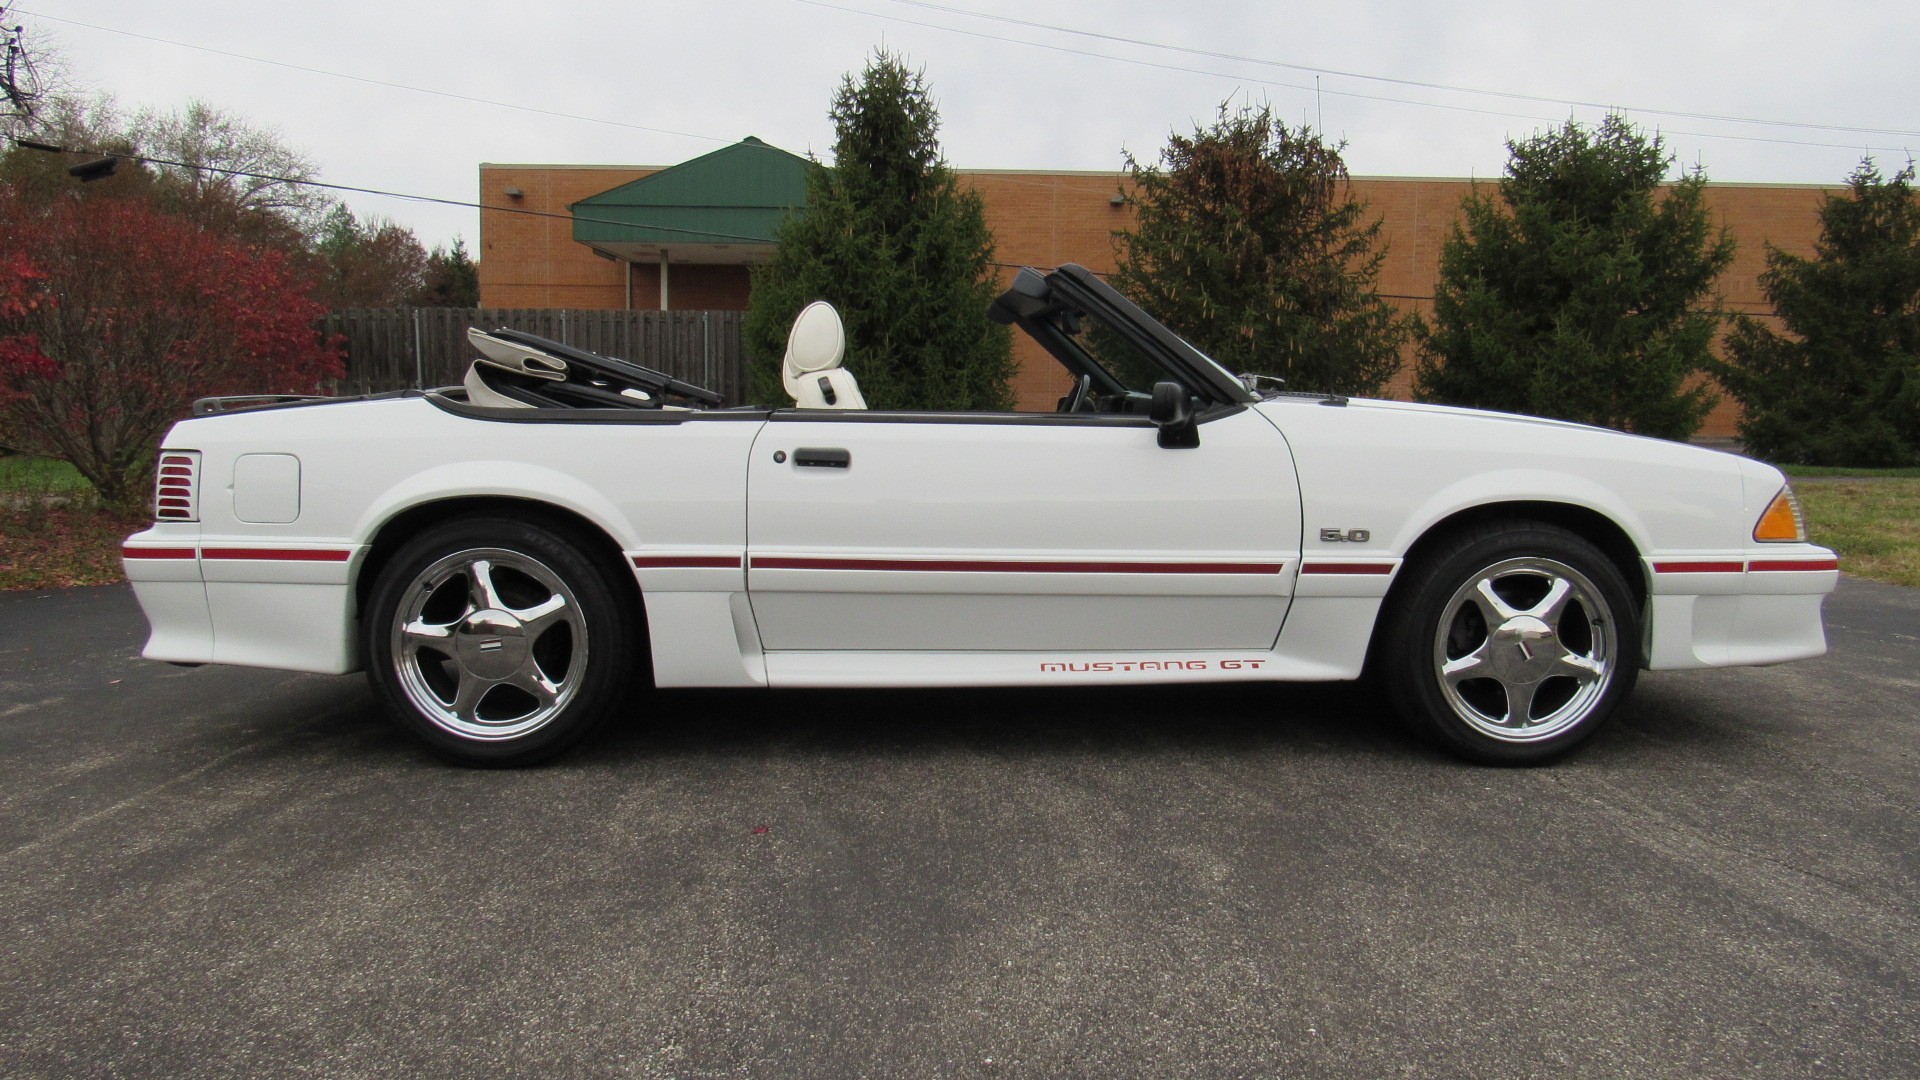 1988 Mustang GT, Triple White, 5 Speed, SOLD!